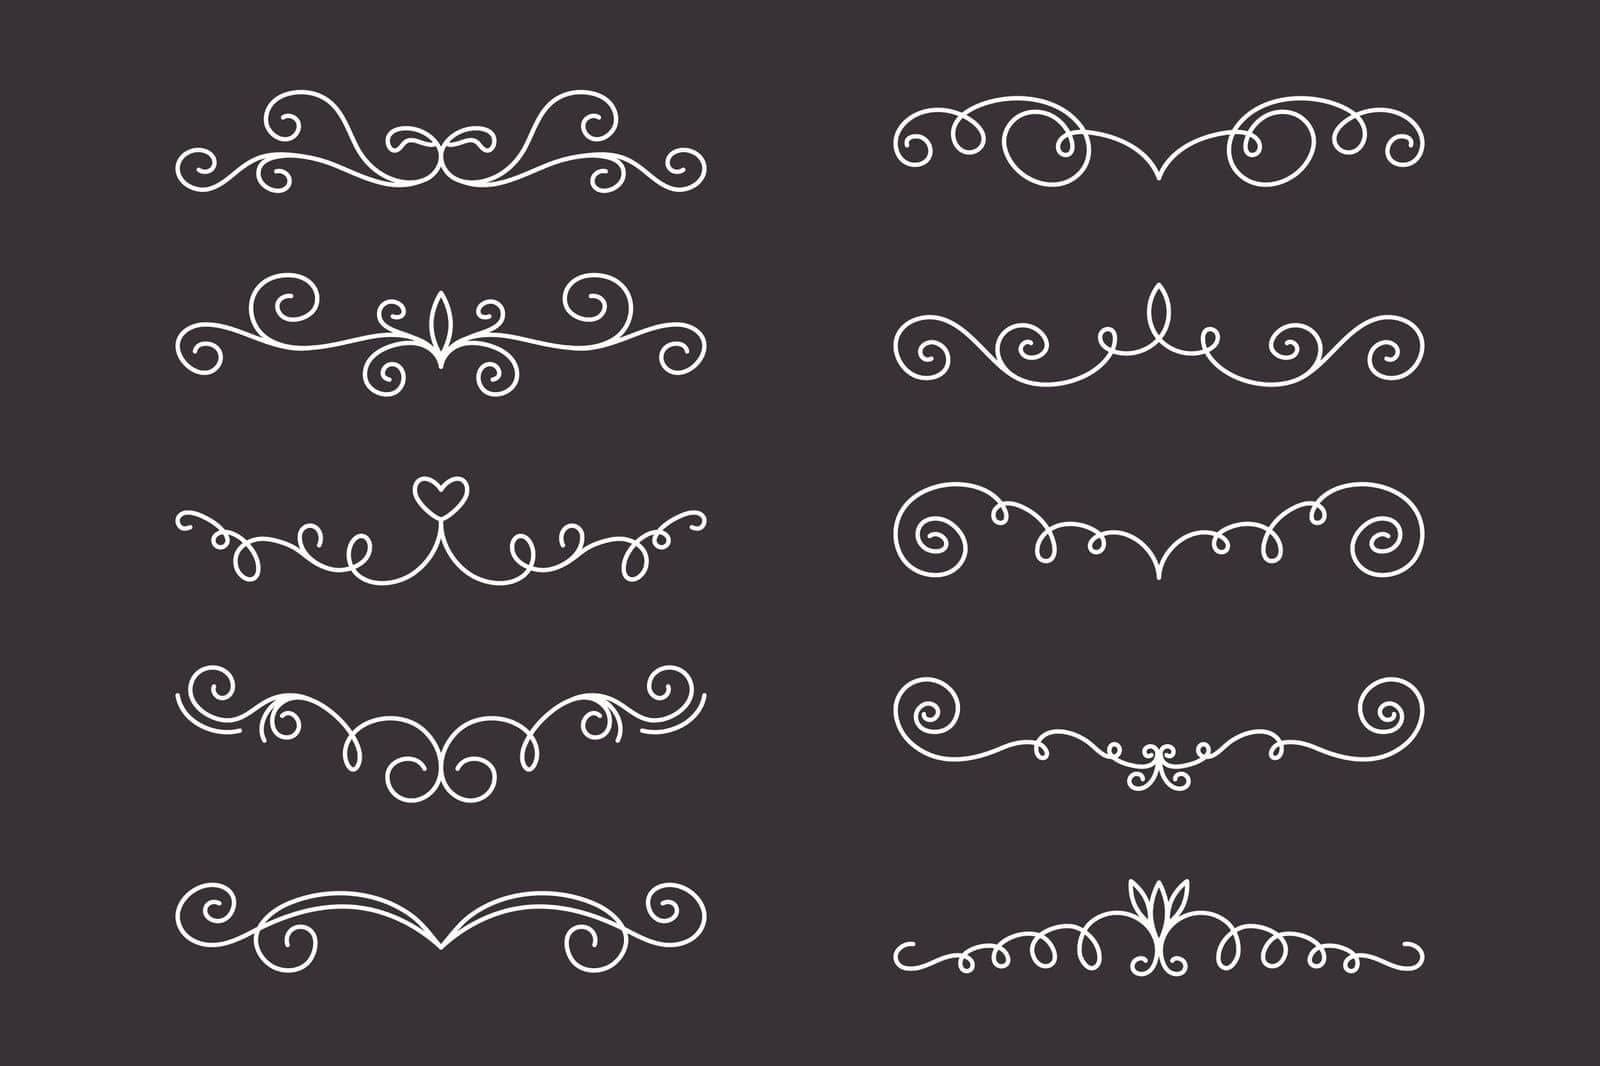 Vector Decorative Linear Dividers Set. Vintage Frame Design Elements, Filigree, Decorative Borders, Page Decorations, Dividers Isolated.